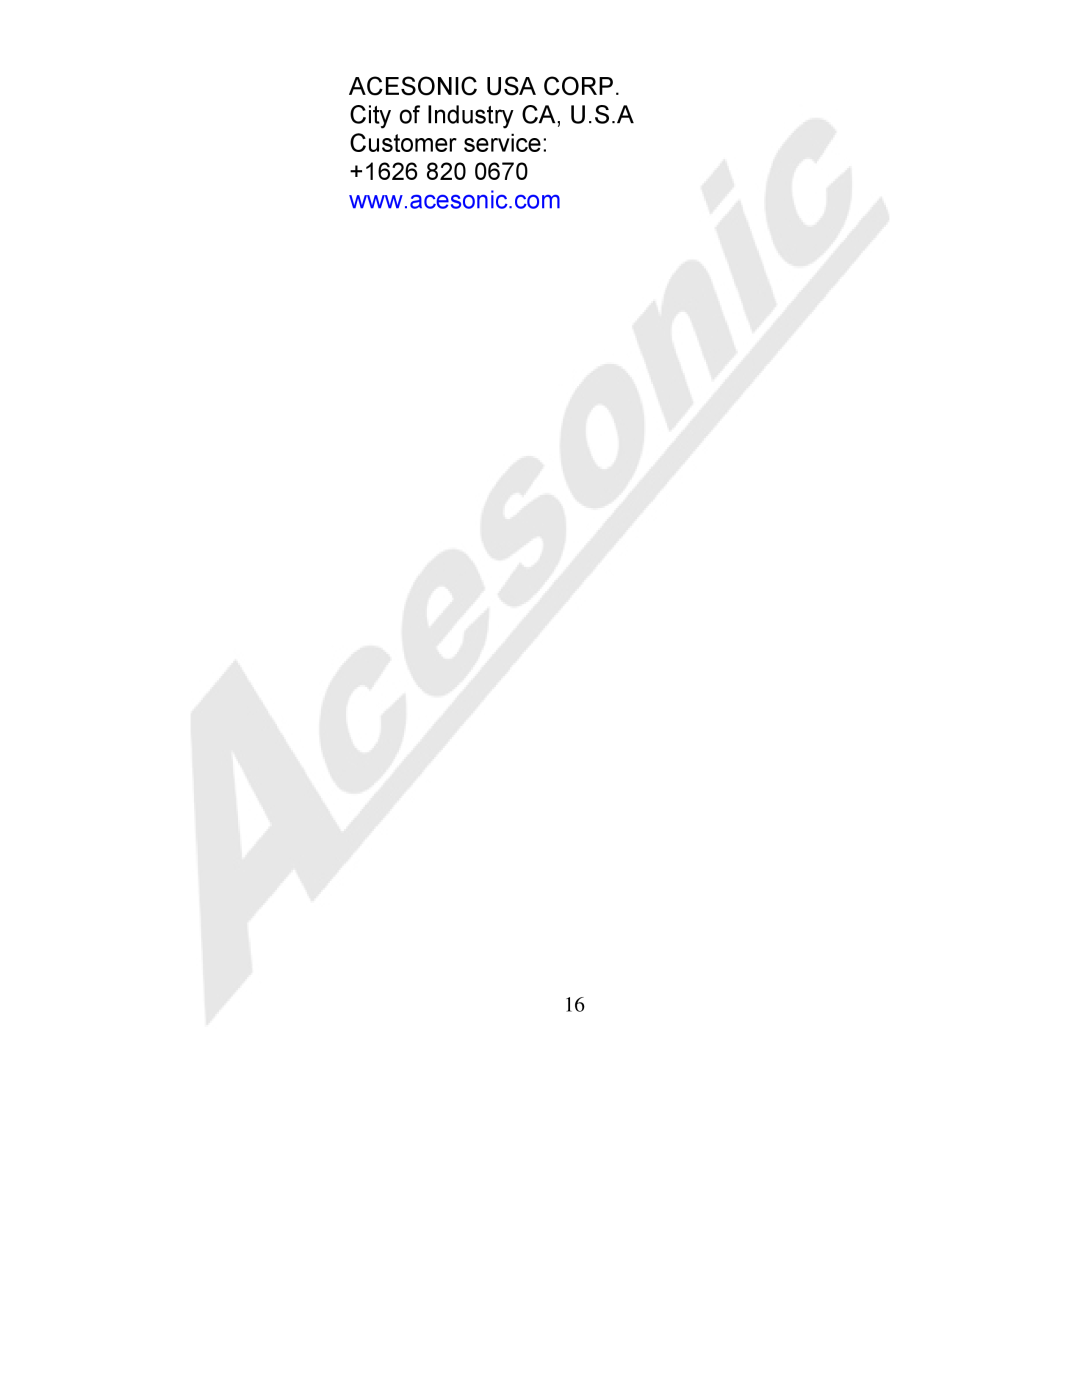 Acesonic BDK-2000 user manual ACESONIC USA CORP. City of Industry CA, U.S.A Customer service 